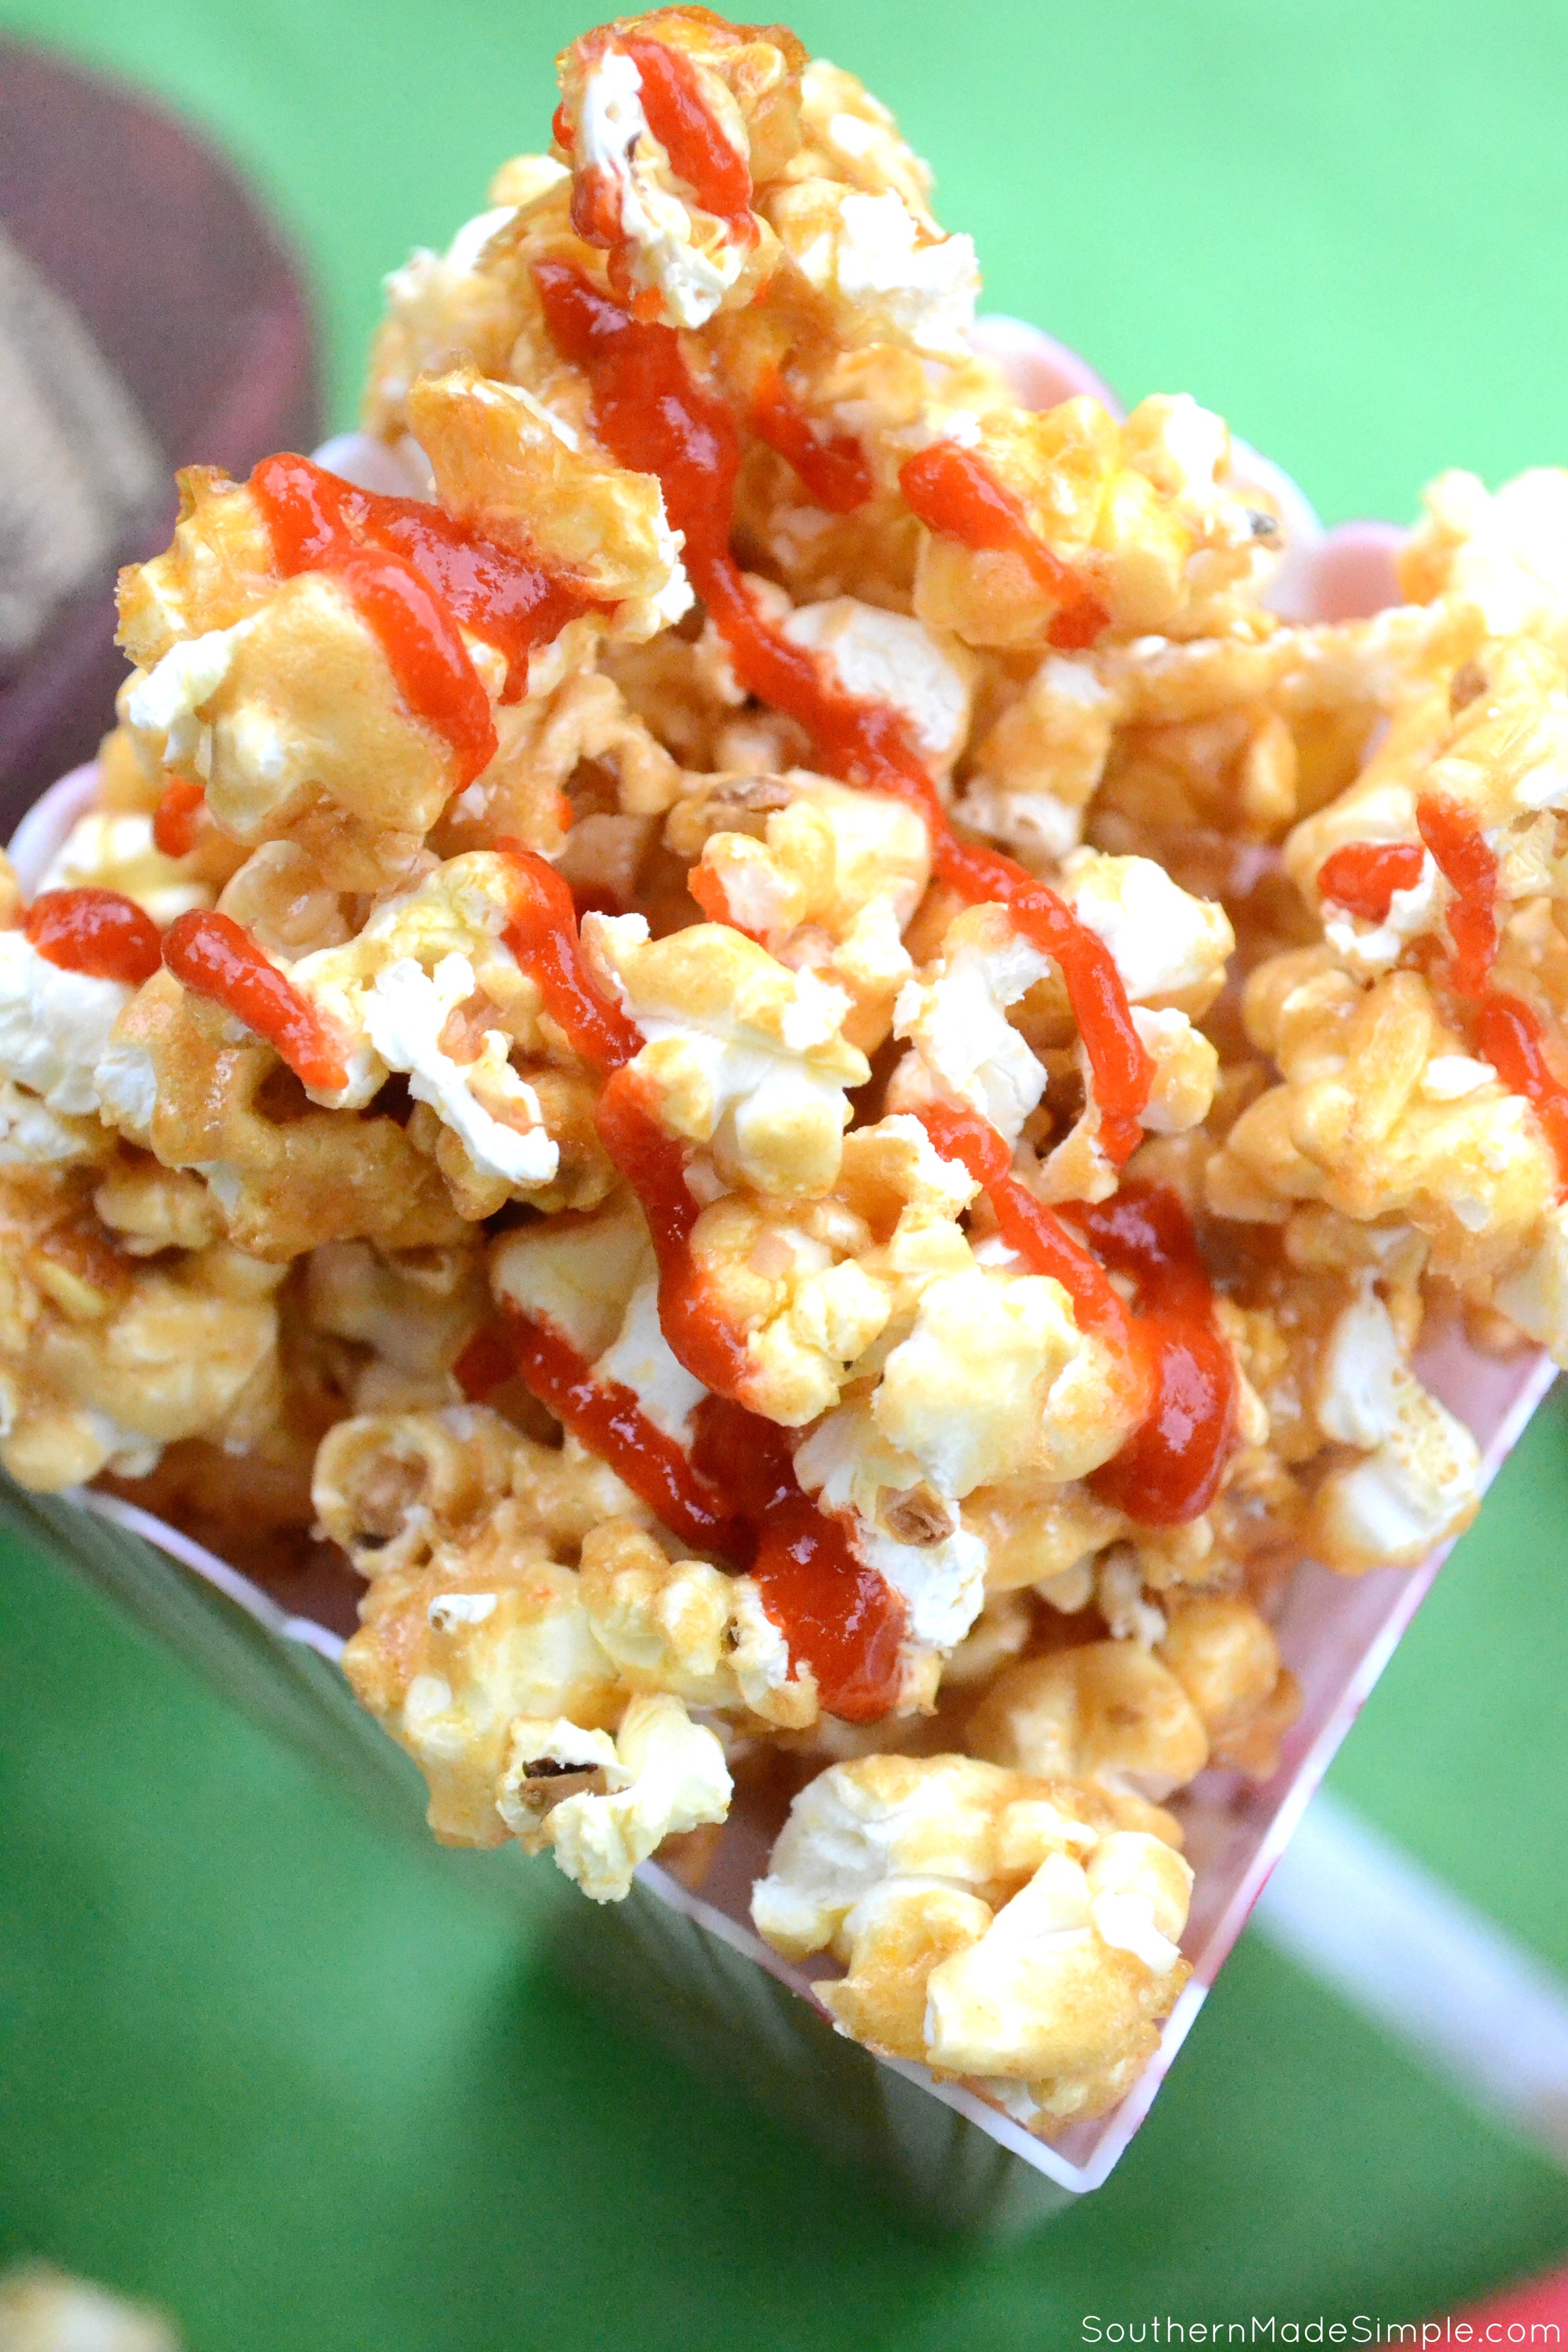 Looking for a fun way to pack in some sweet heat into your game day spread? This Smokin' Sriracha Caramel Popcorn is the perfect treat to make your game day POP with flavor! #AllStarSnackBar #ad